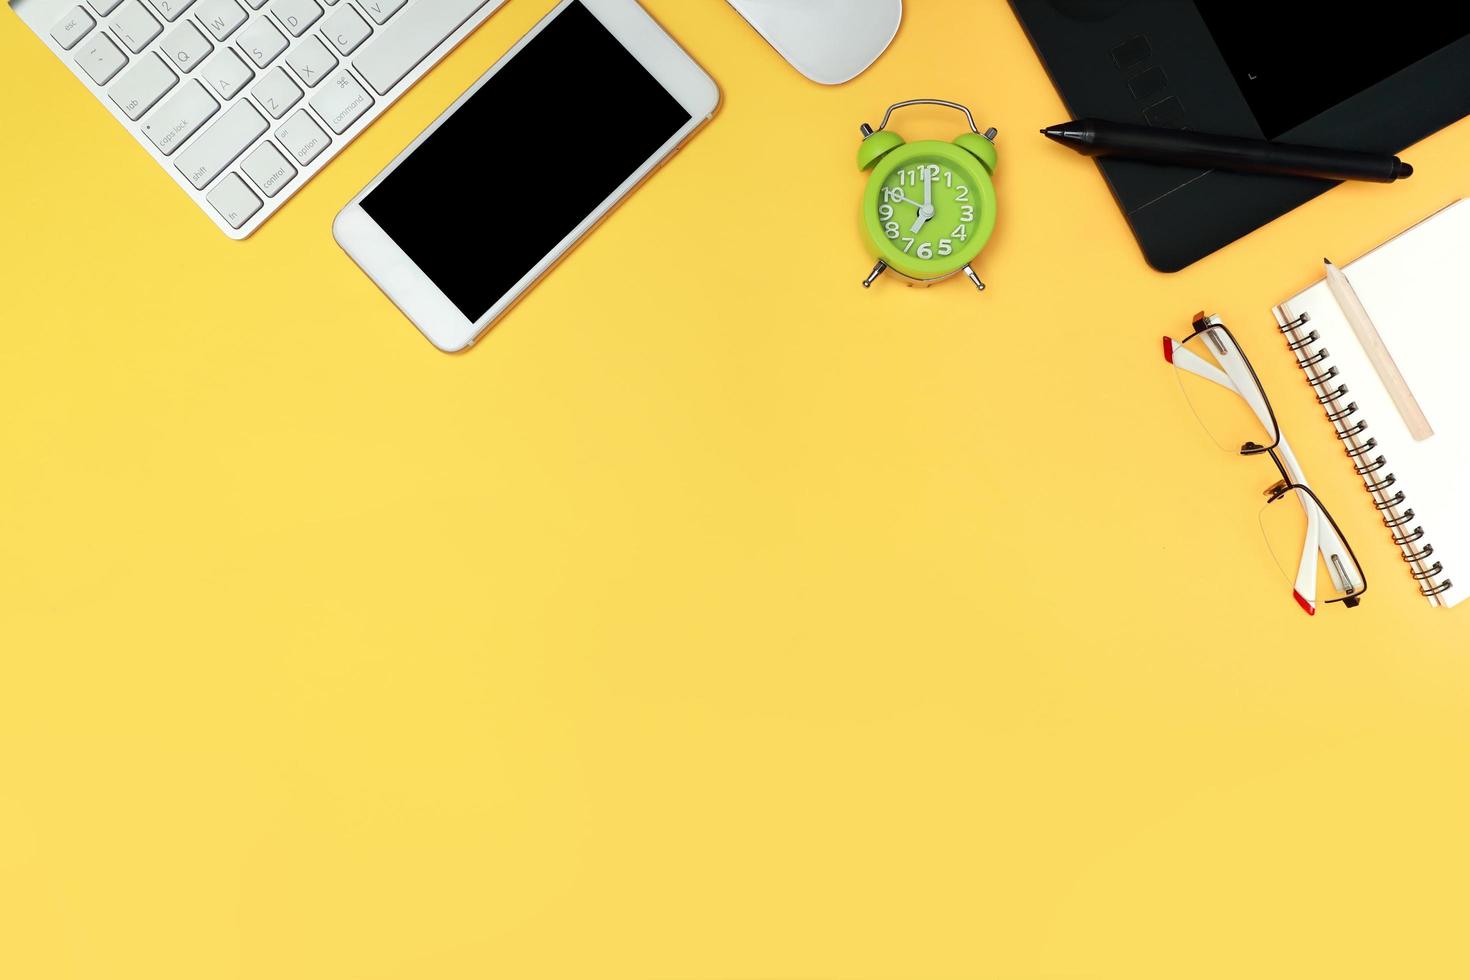 graphic designer desk top view with computer, smart phone, glasses, notebook, and time clock on yellow background photo